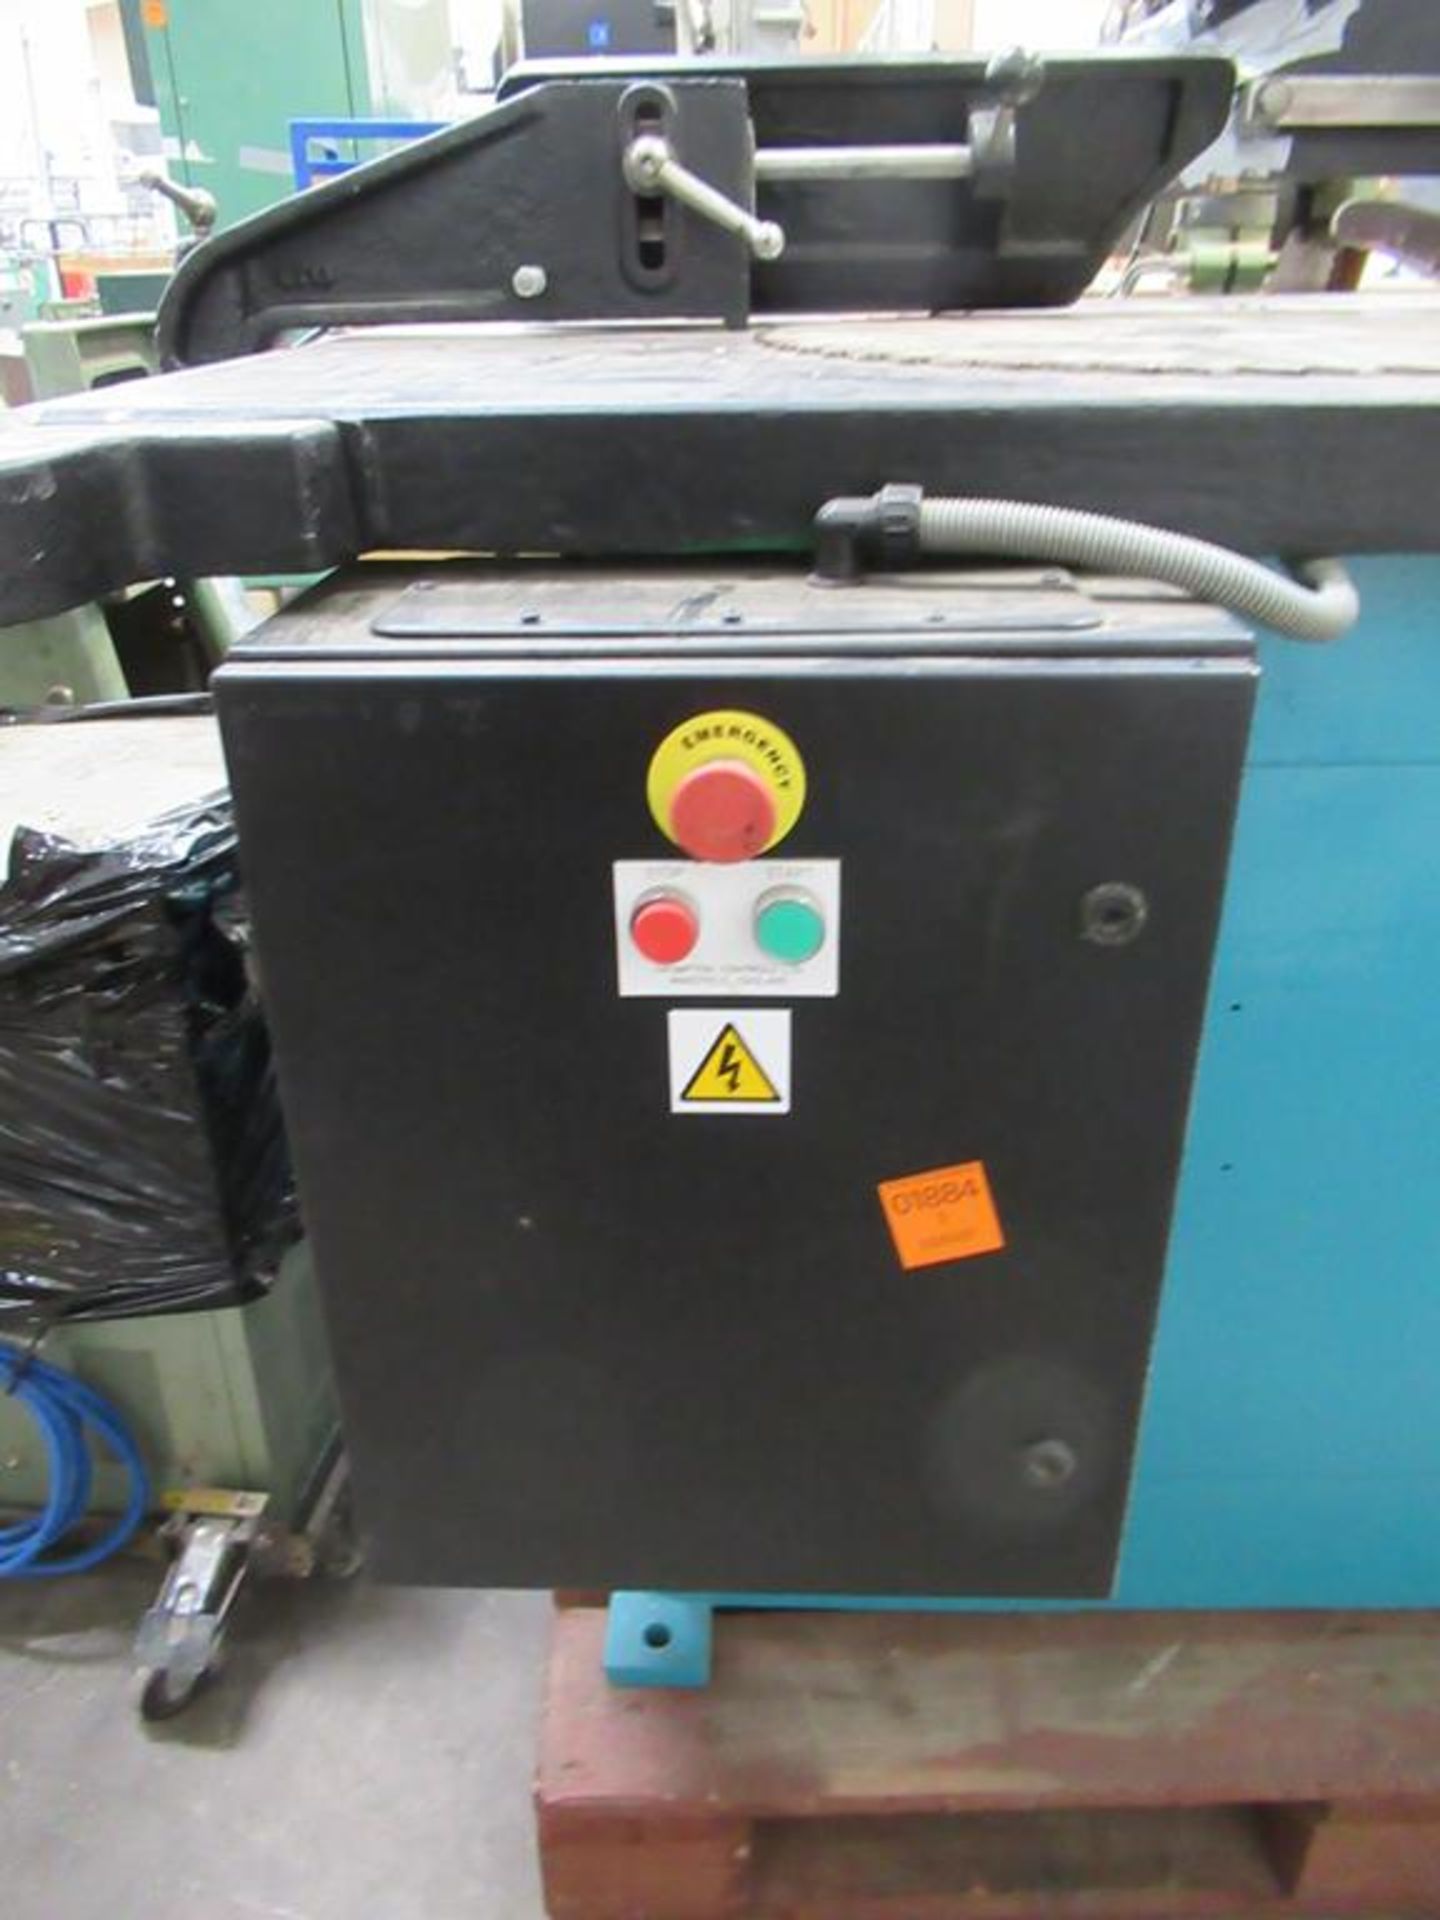 A Dominion Heavy Duty Ripsaw with DC Brake. 415V, 50Hz, 3 phase - Image 6 of 7